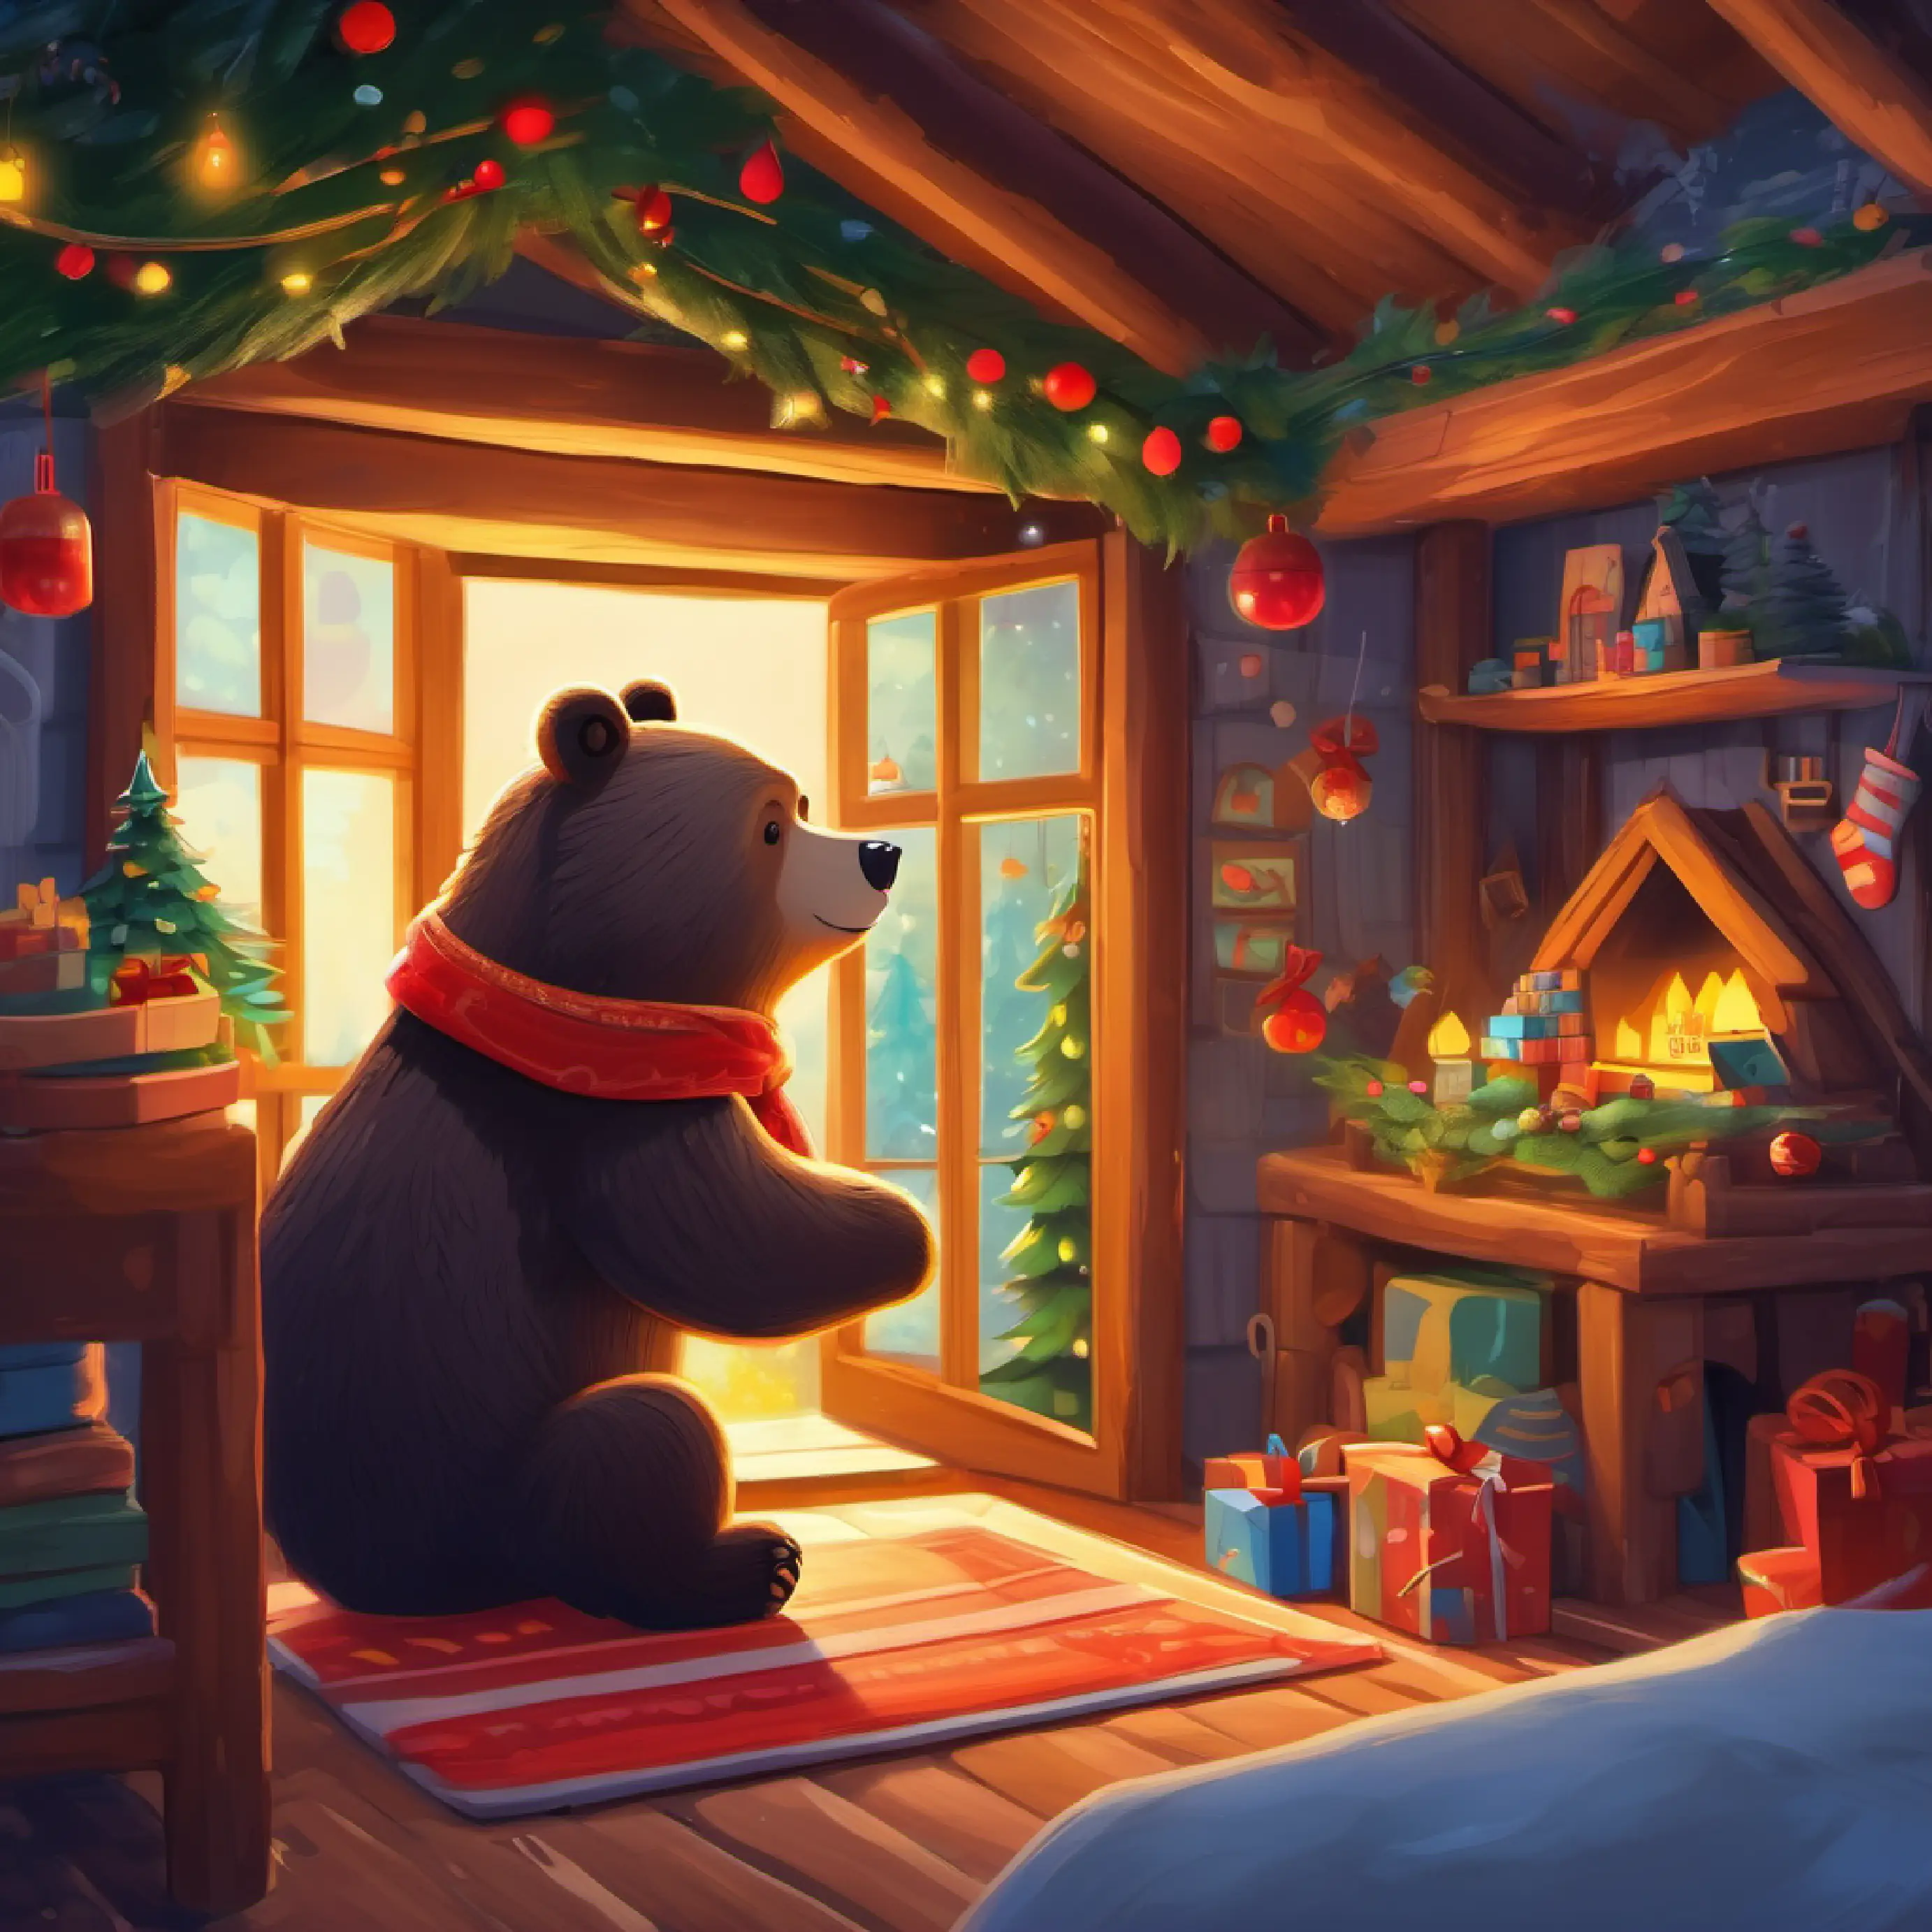 Snoody the bear wakes up in his forest house, feeling happy.